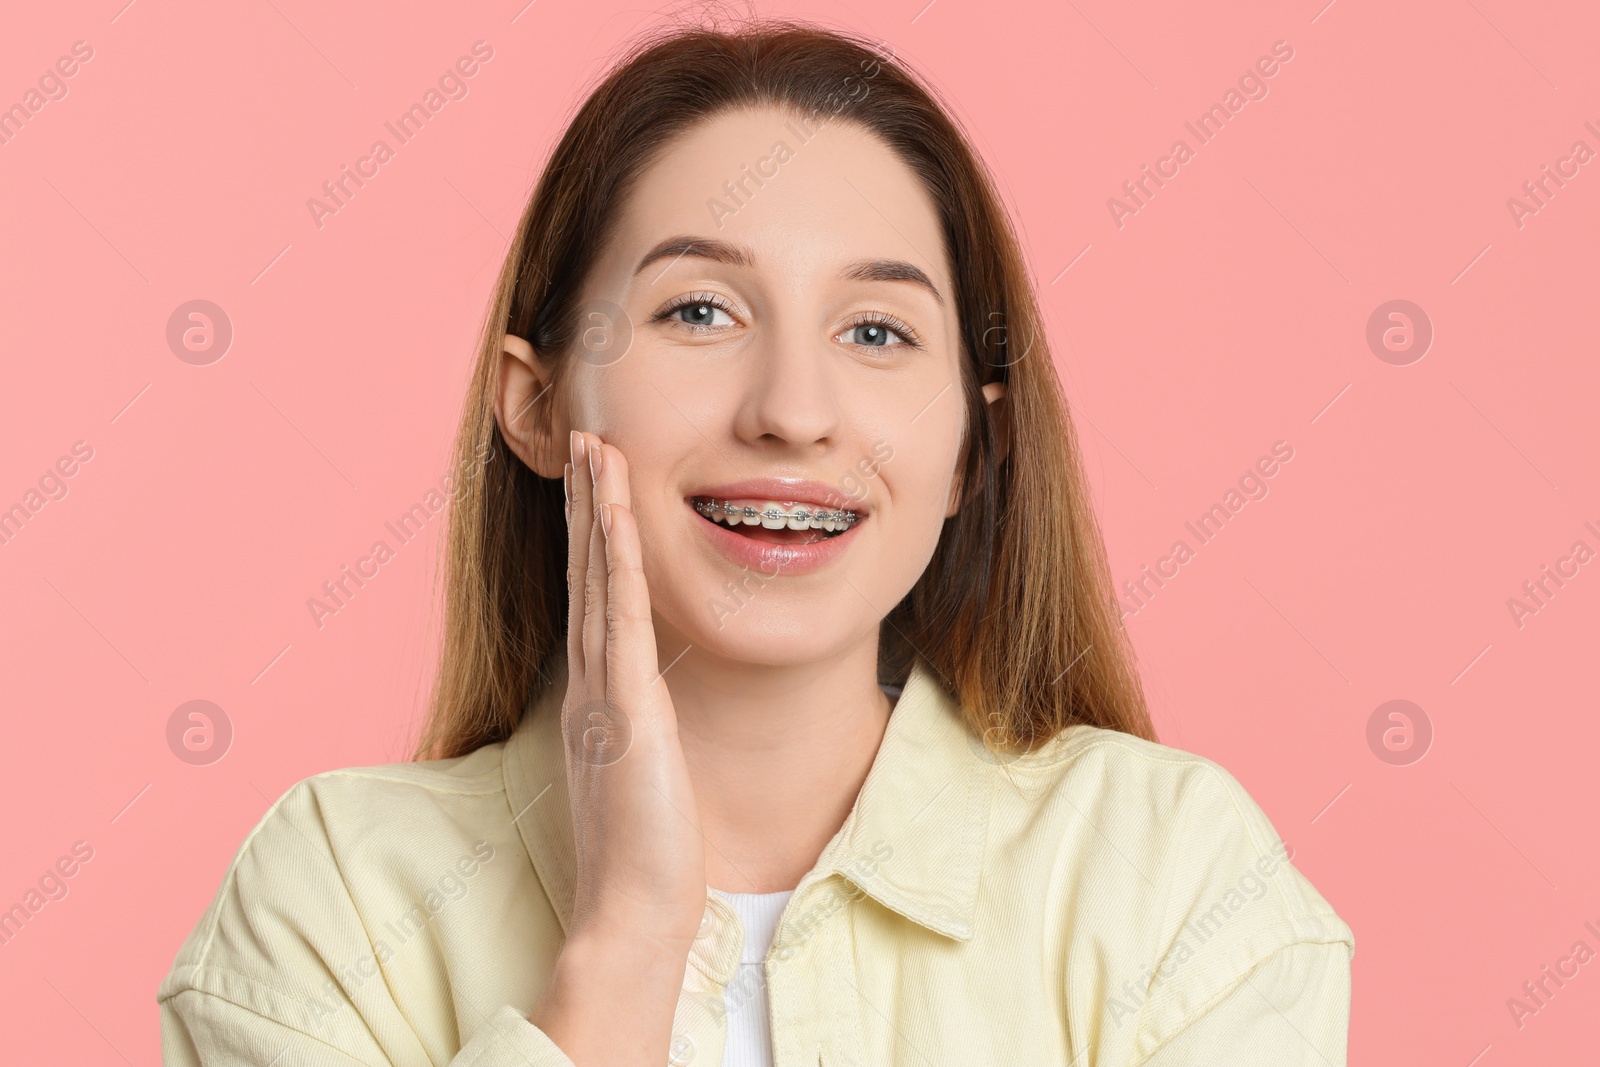 Photo of Portrait of smiling woman with dental braces on pink background